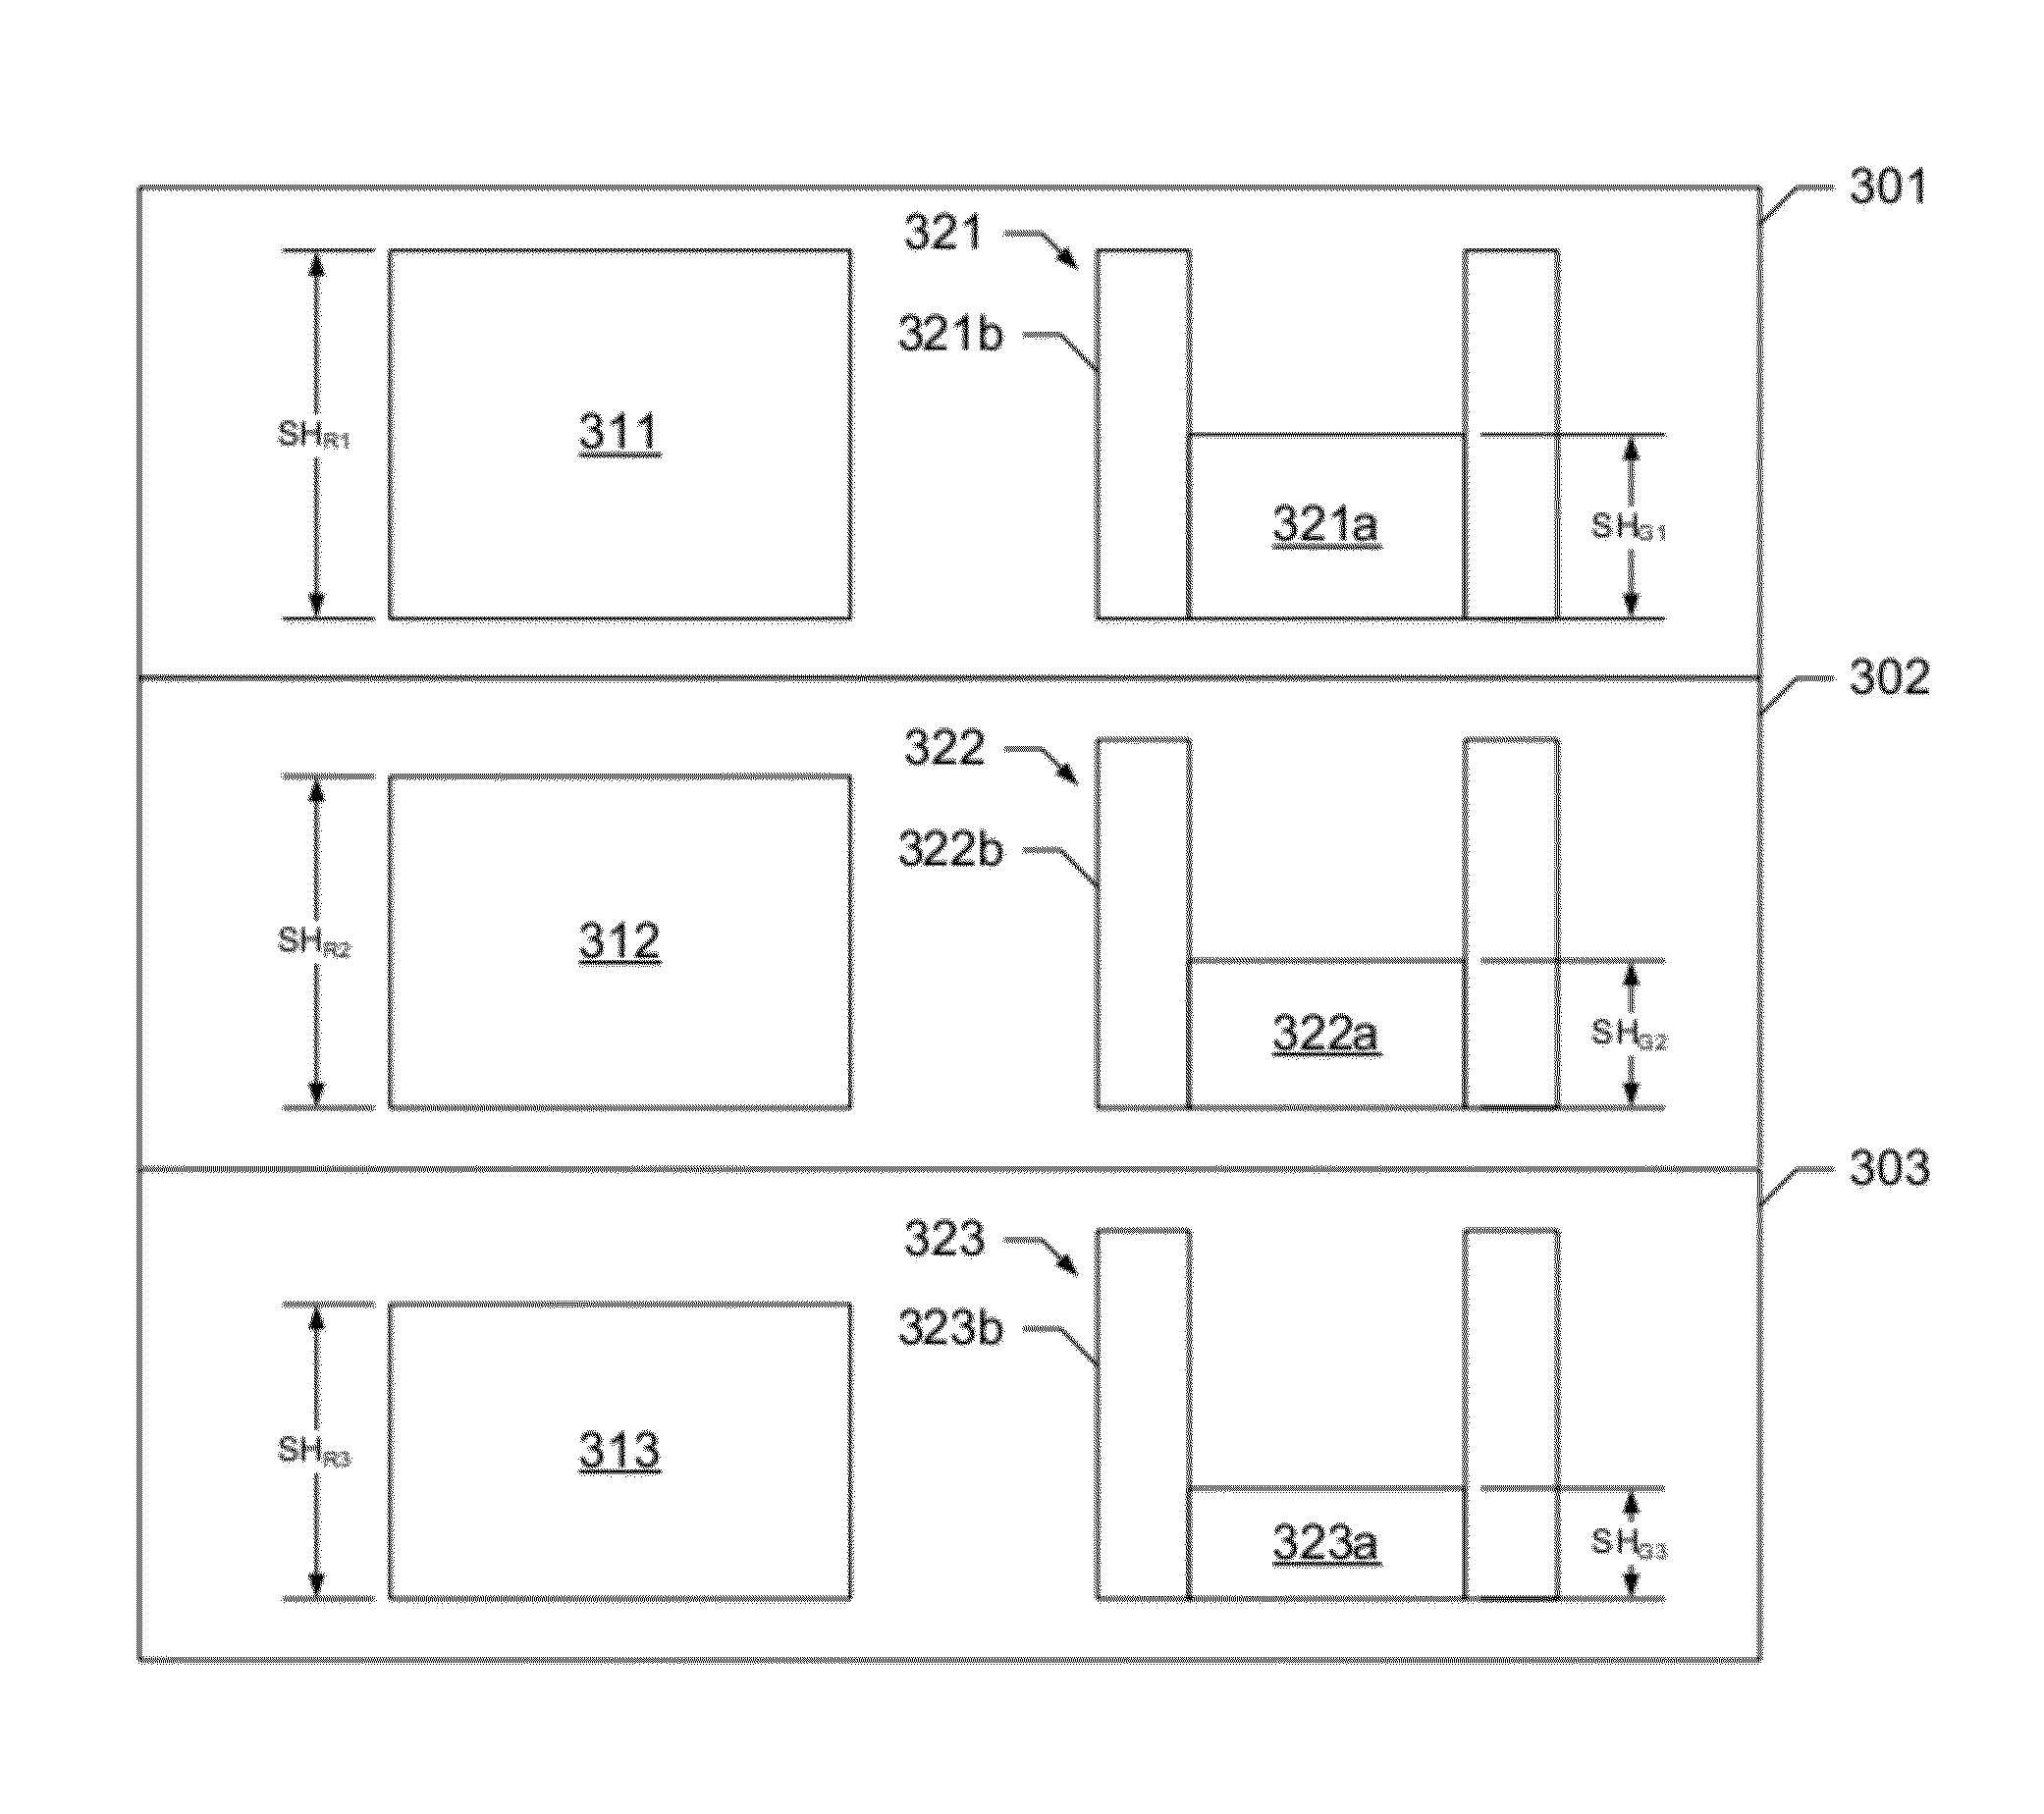 Method for modeling devices in a wafer